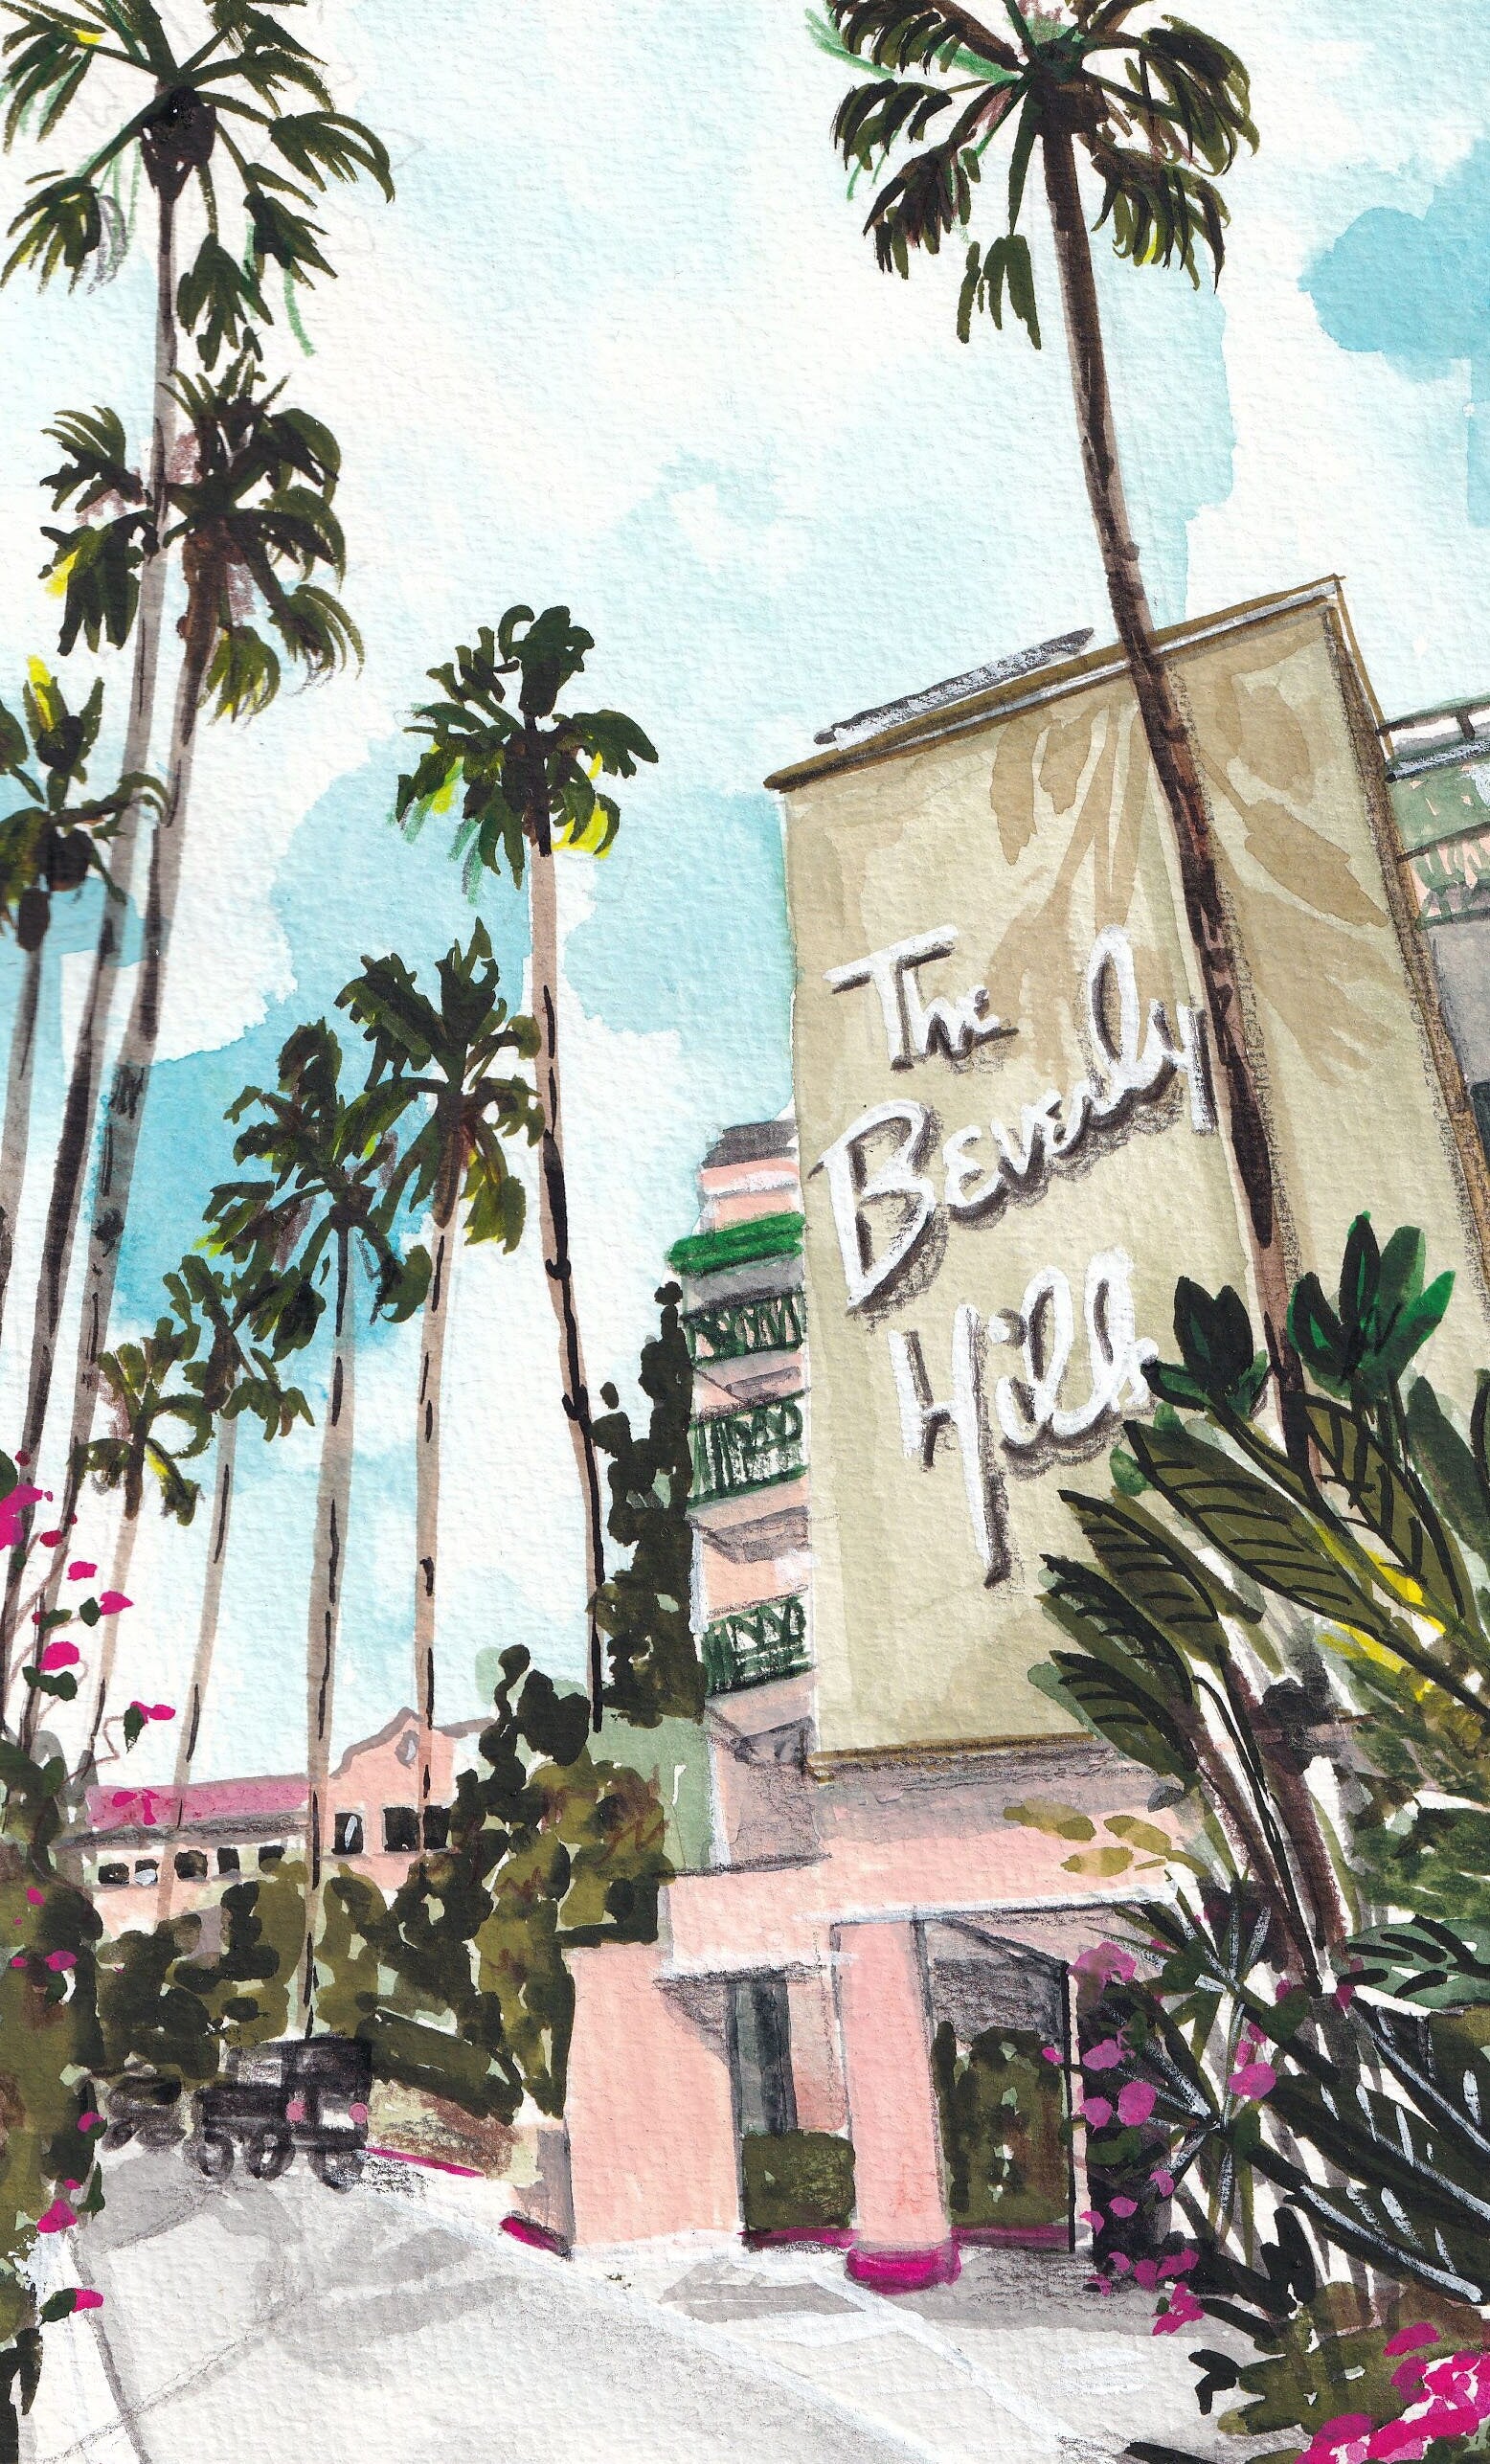 Beverly hills hotel print of painting by Medjool Studio. Print of original gouache painting of the Beverly Hills Hotel in Los Angeles California featuring the front of the hotel and palm trees.